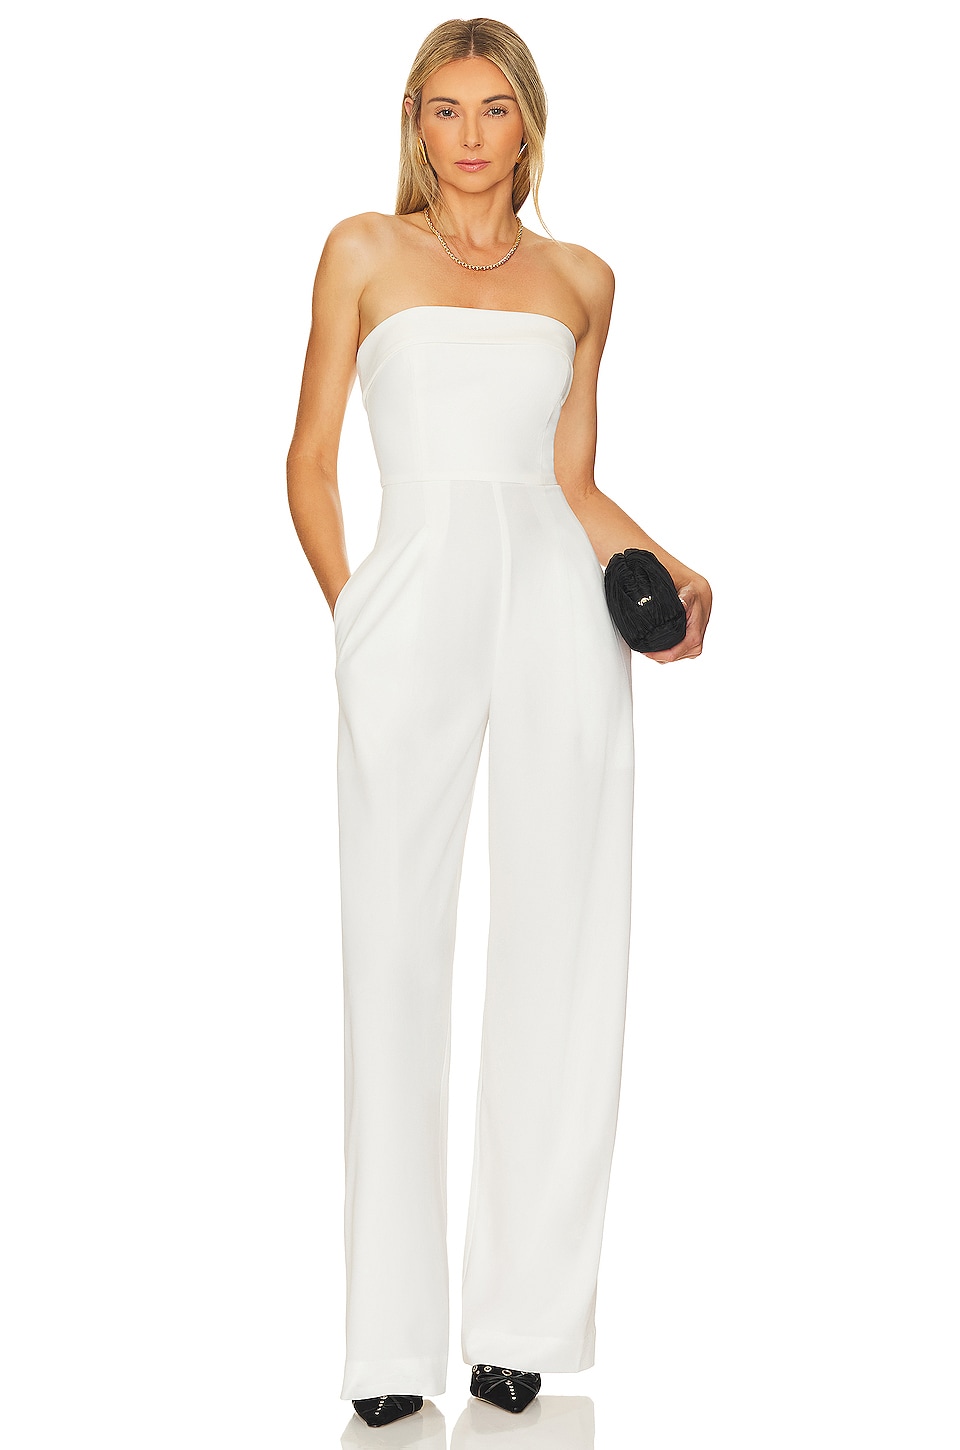 NICHOLAS Chara Strapless Wide Leg Jumpsuit in Off White | REVOLVE